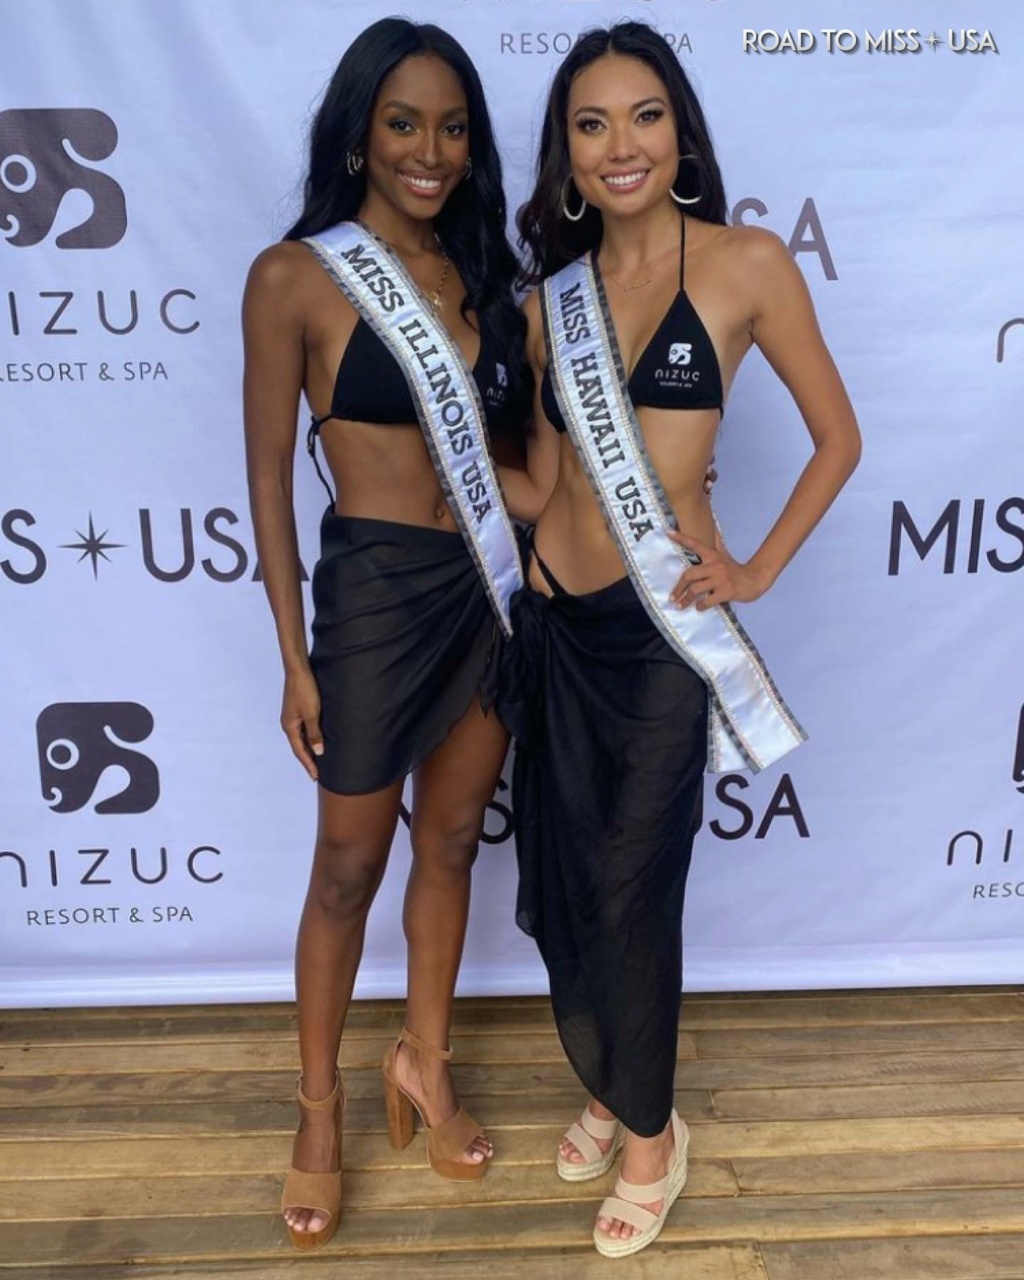 ROAD TO MISS USA 2021 is KENTUCKY! - Page 3 24188711